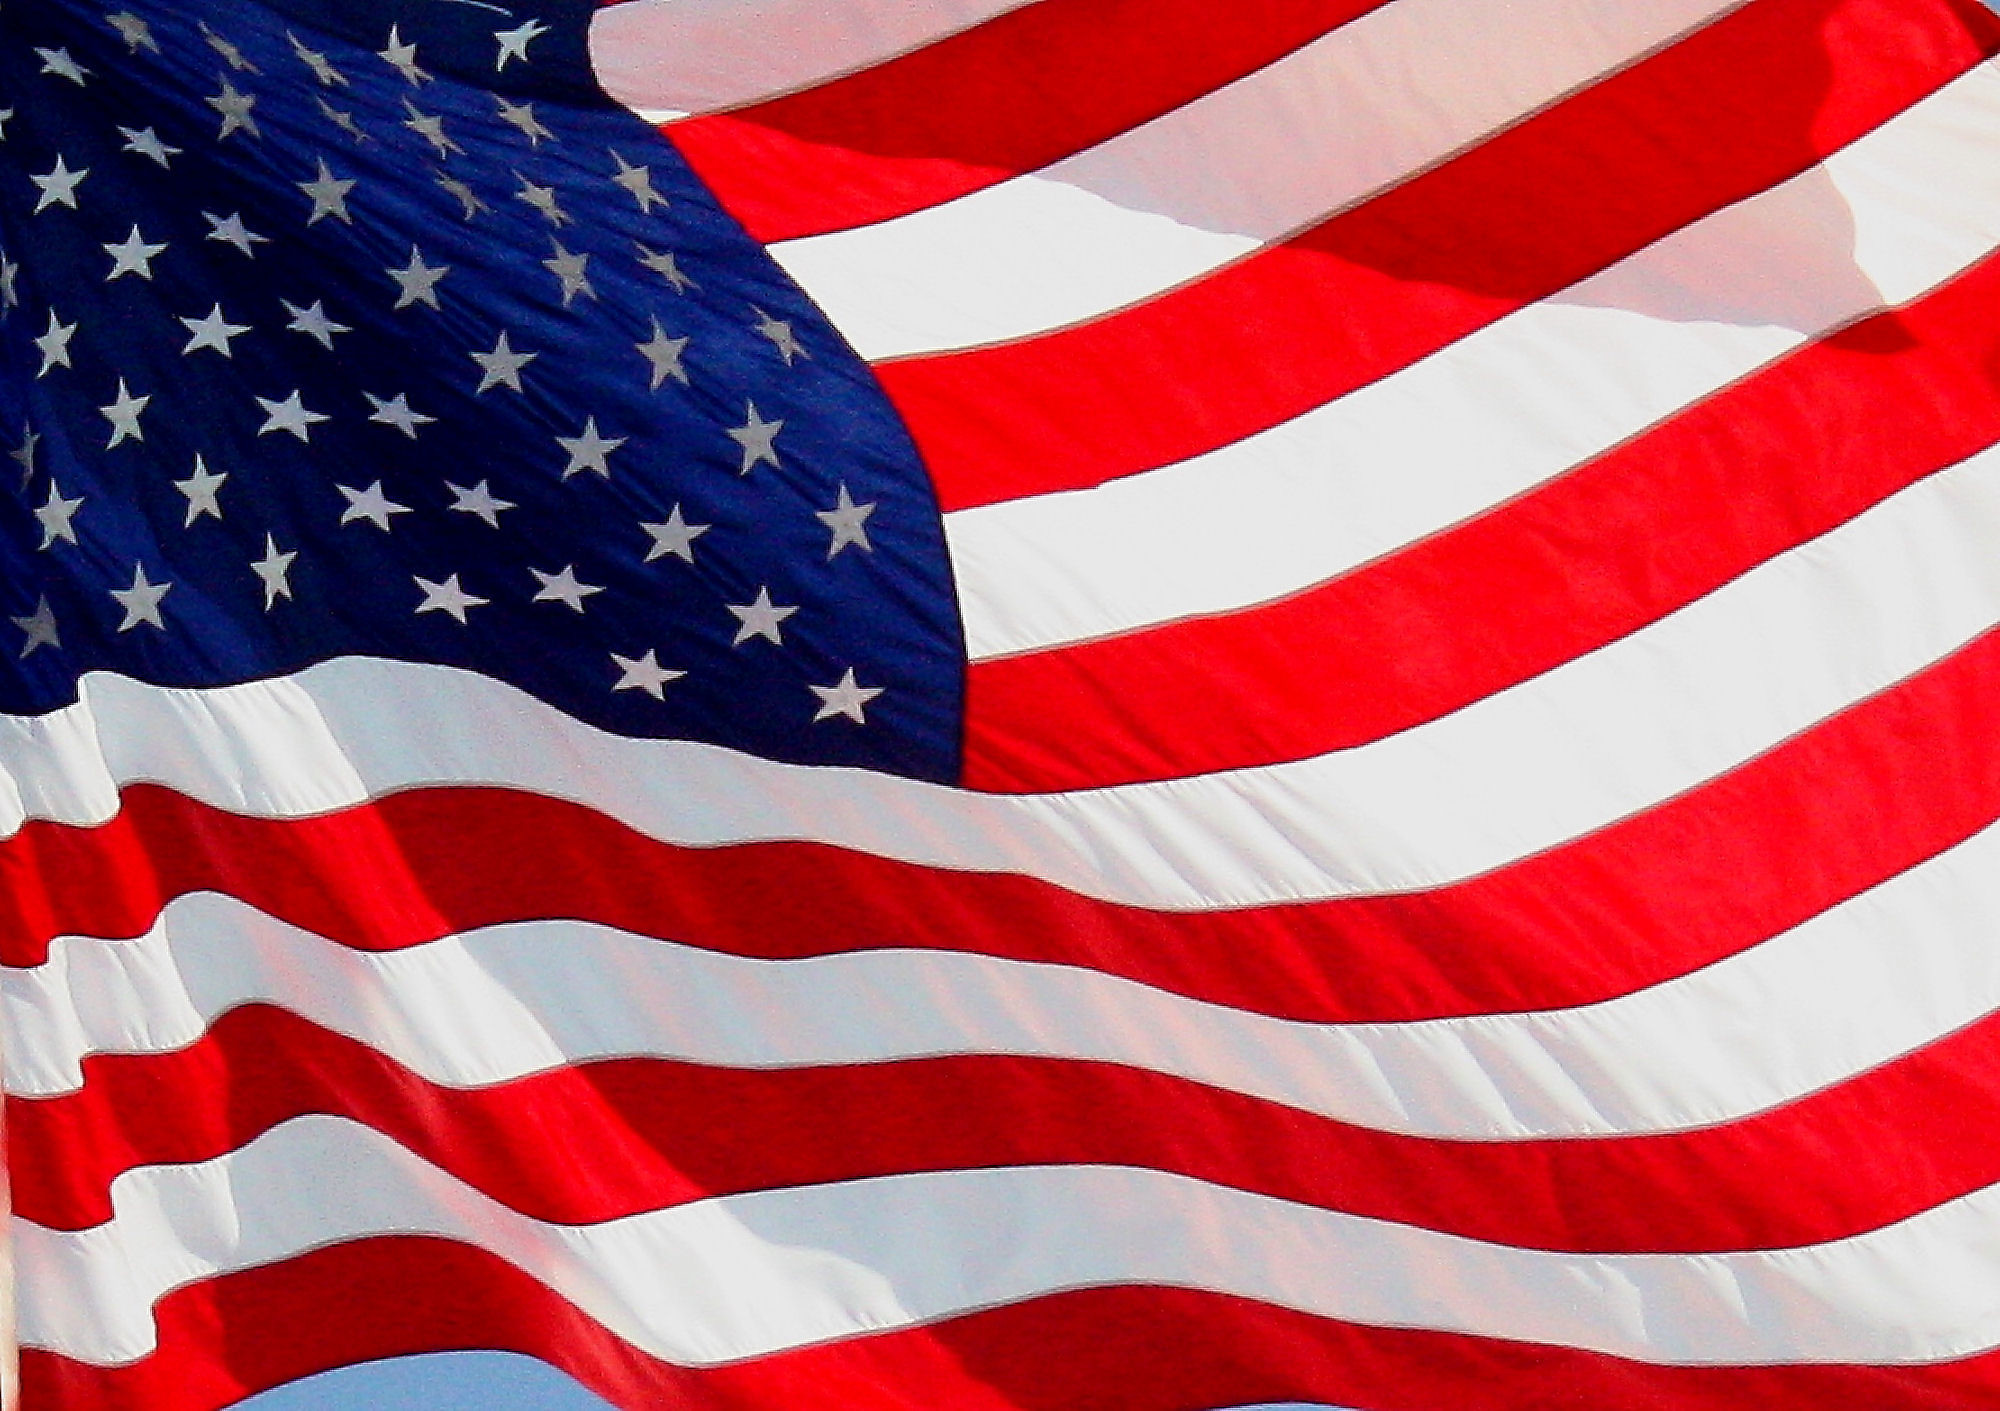 2000x1411 american flag wallpaper iphone with high resolution 2000Ã1411 wallpaper  desktop images background photos hd free windows wallpaper iphone mac  2000Ã1411 ...